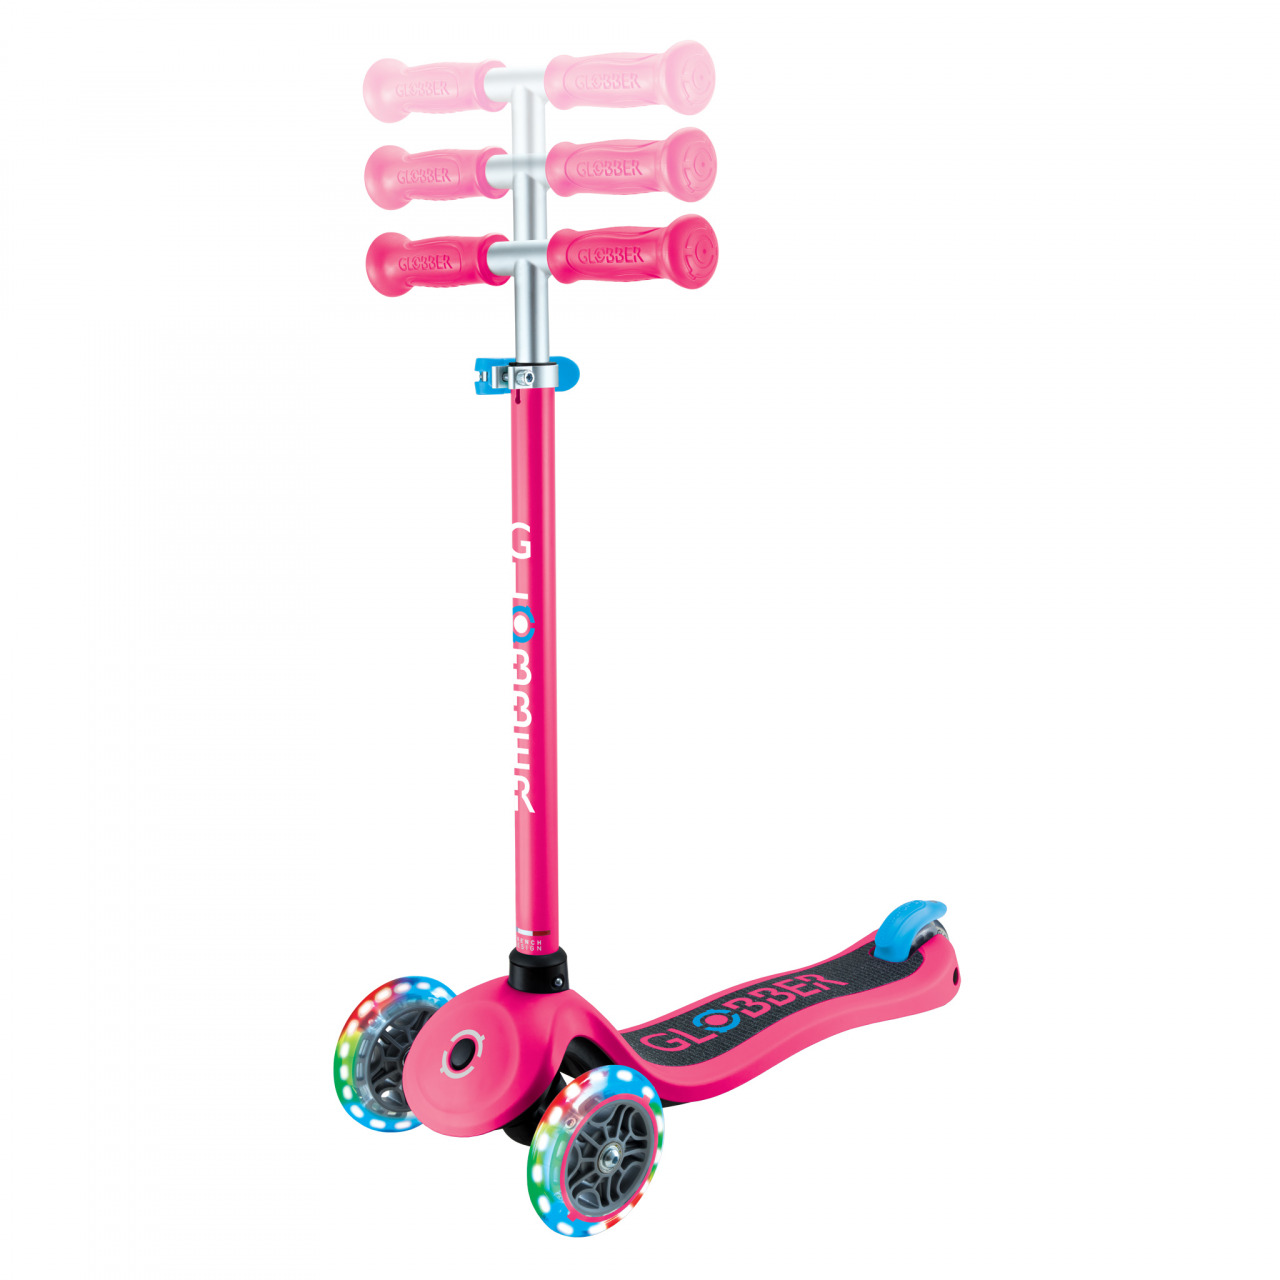 423 610 4 Adjustable Scooter With Led Lights